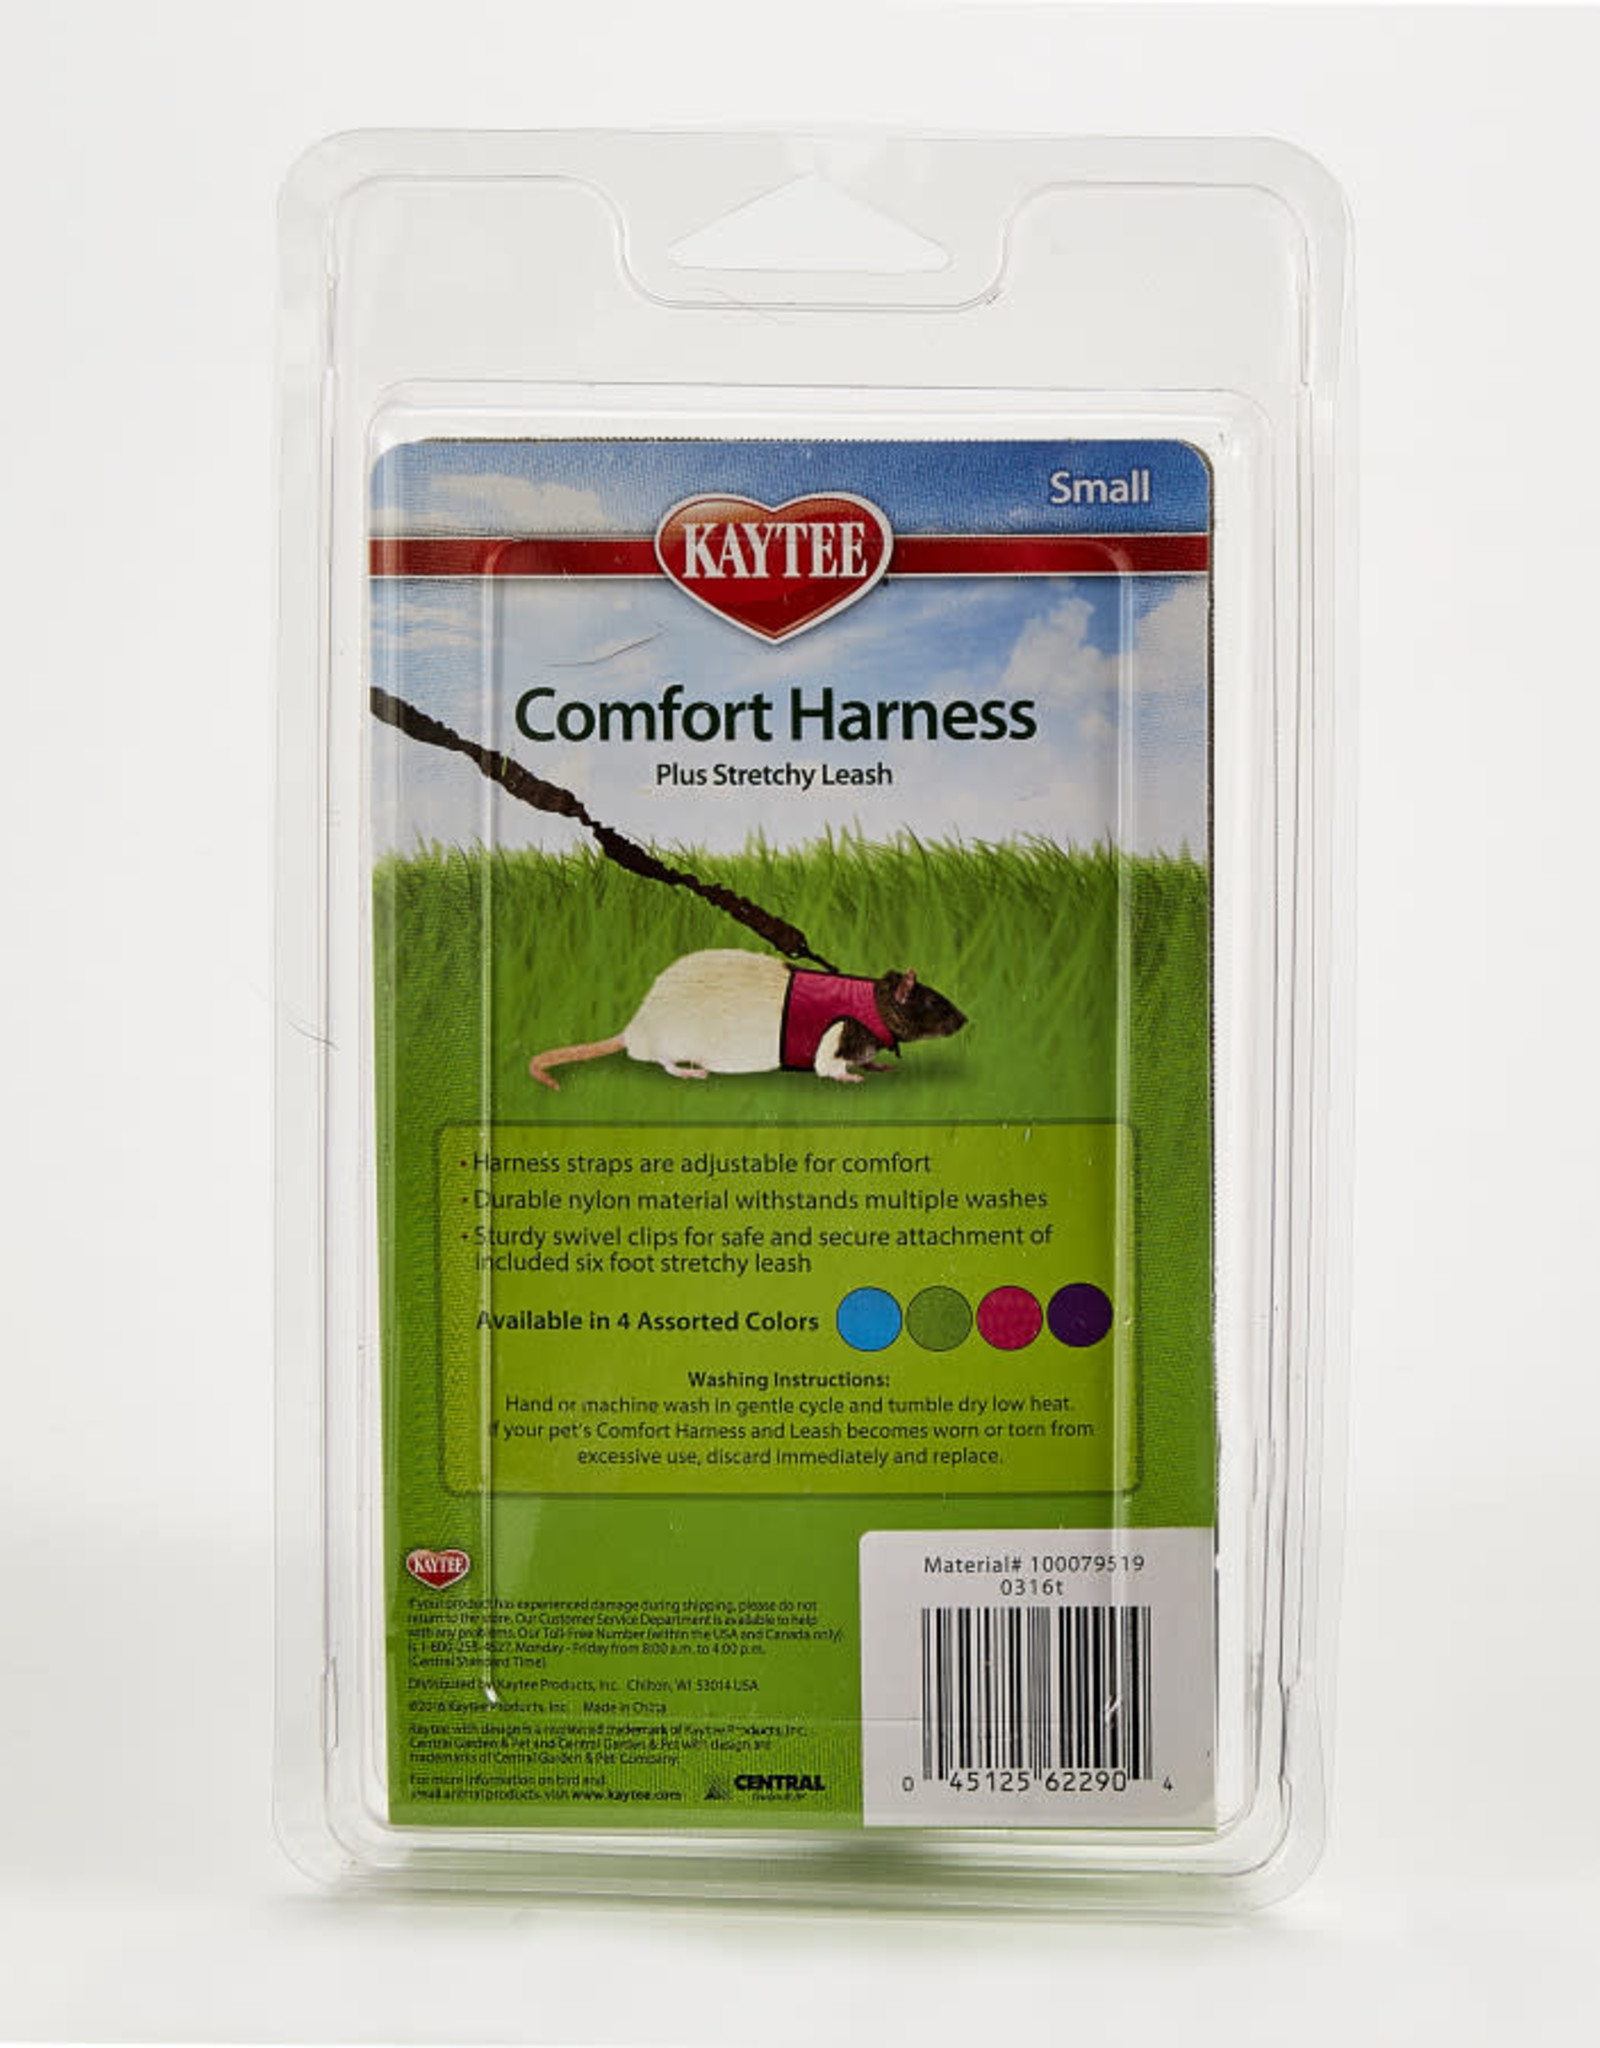 CENTRAL - KAYTEE PRODUCTS KAYTEE- COMFORT HARNESS- 8X4.5X1.5- STRETCHY LEASH- SMALL